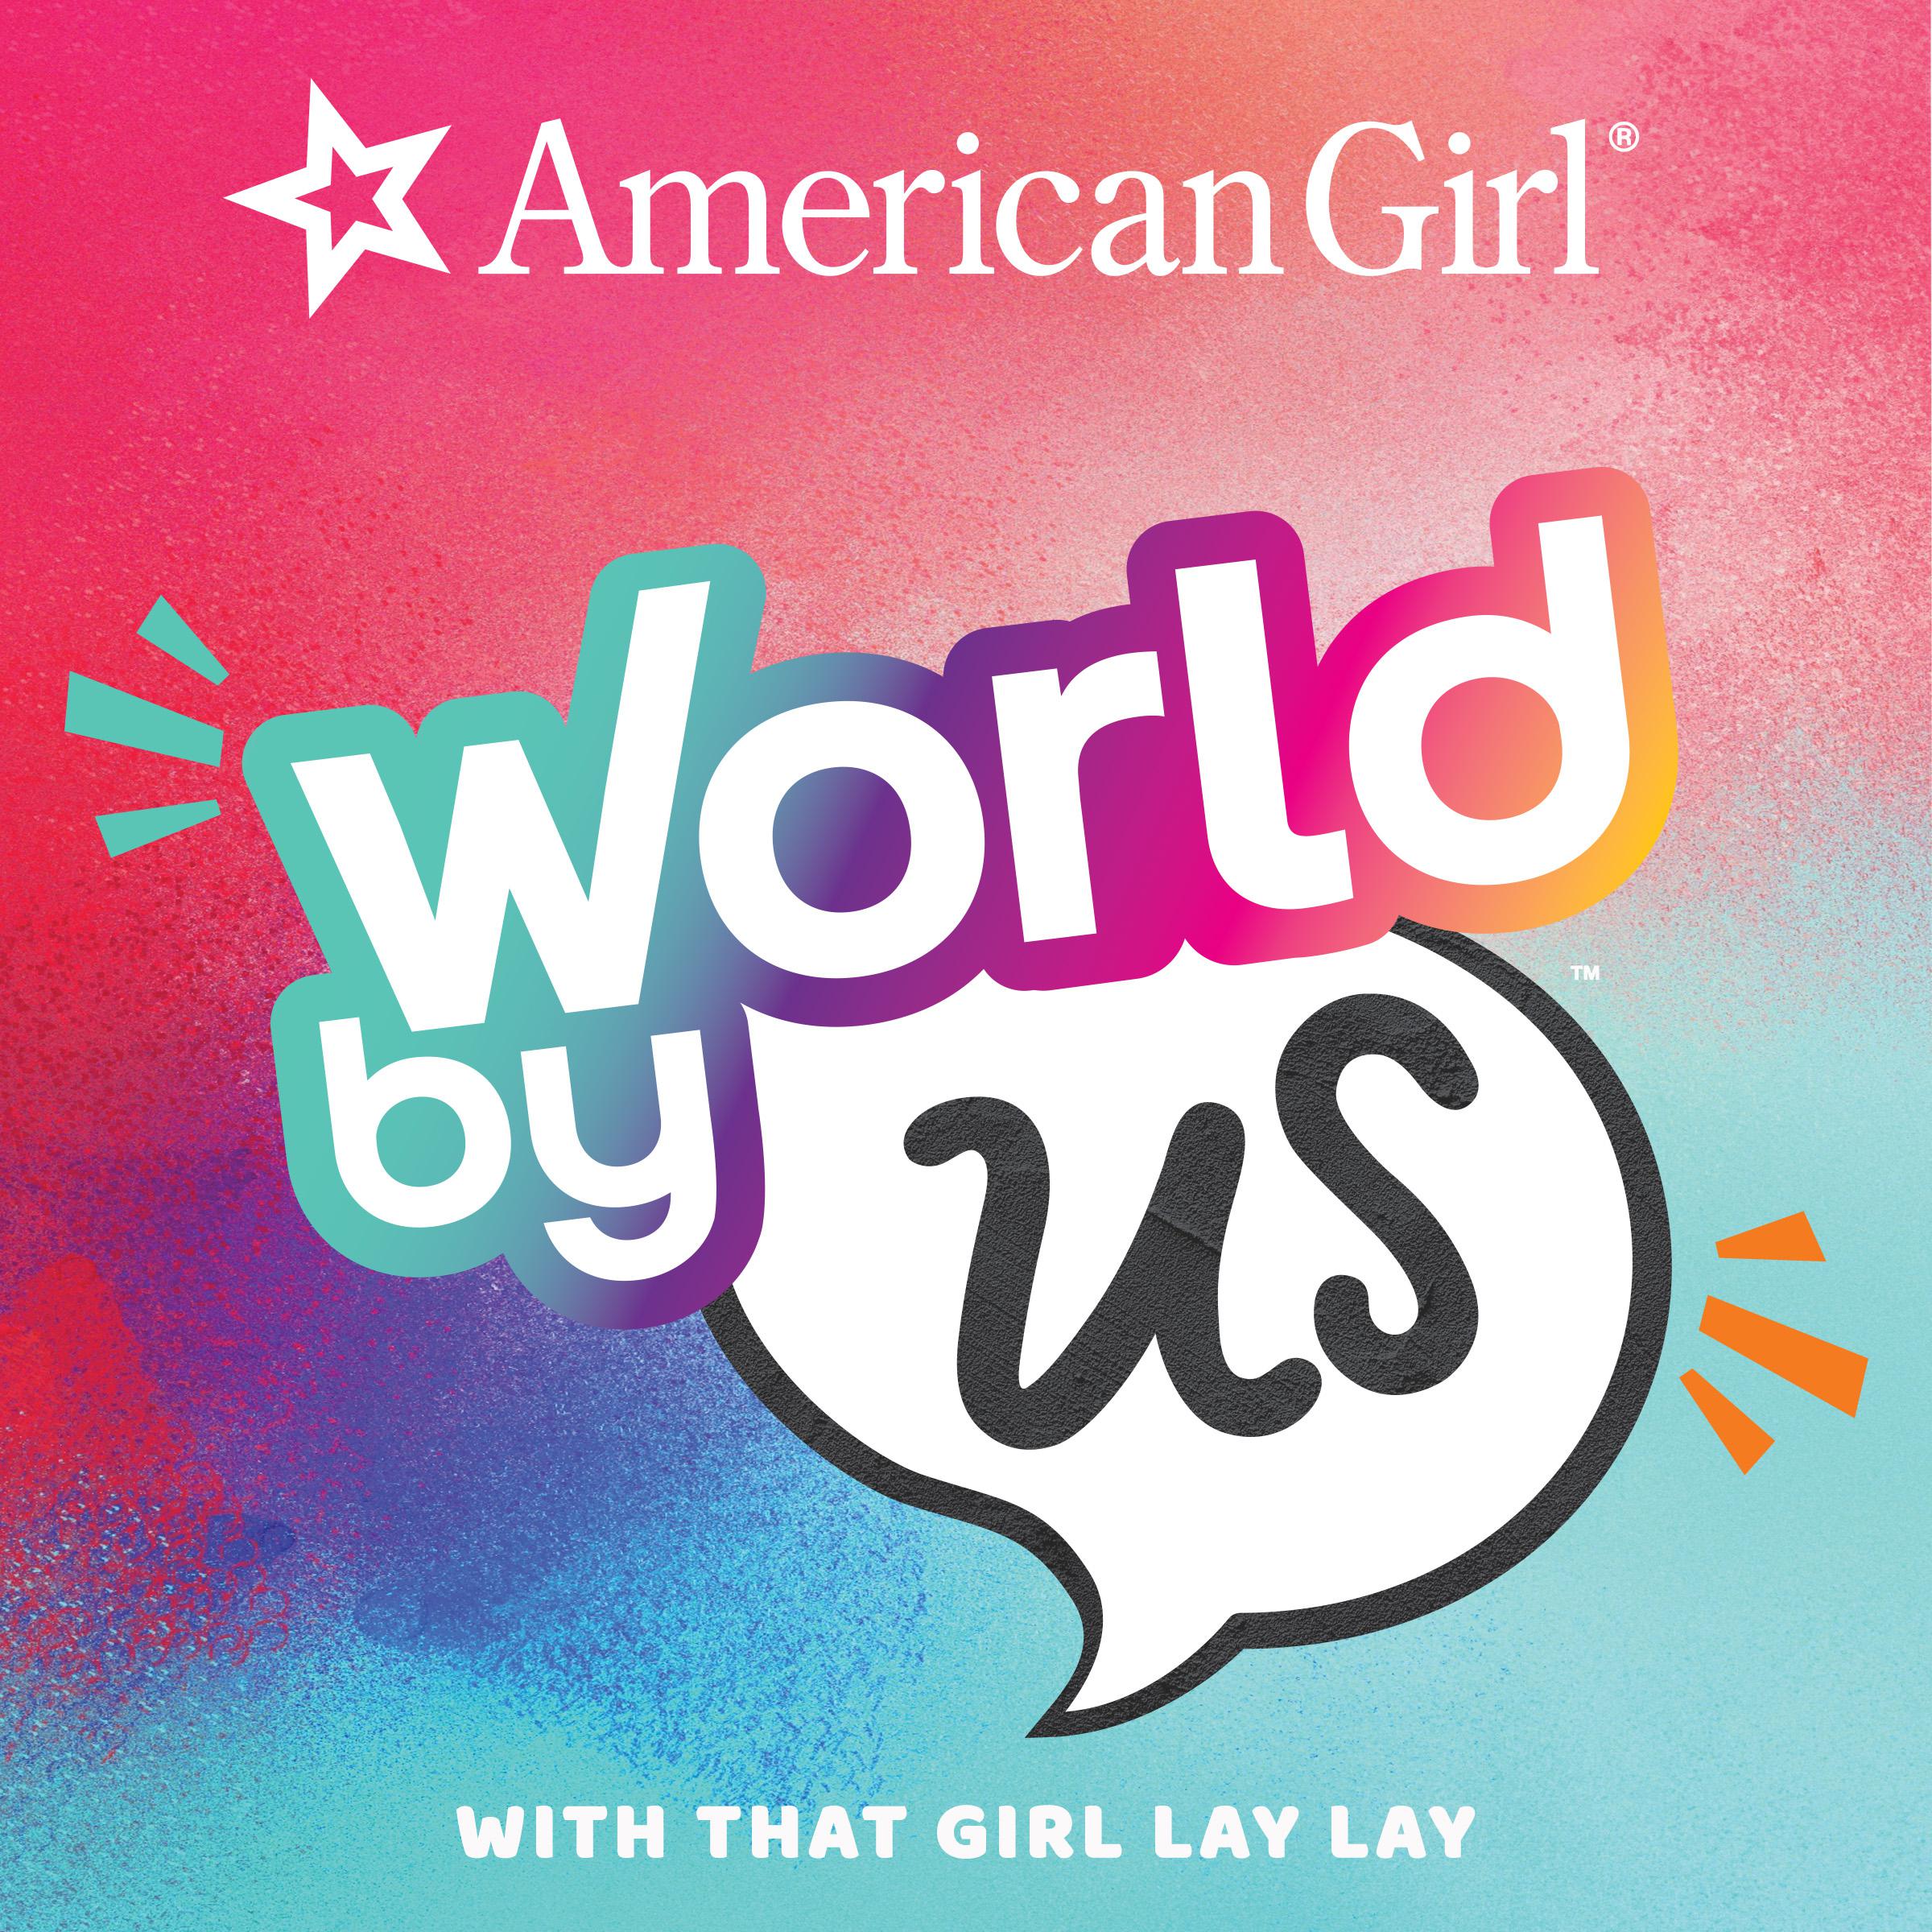 American Girl - A World By Us!